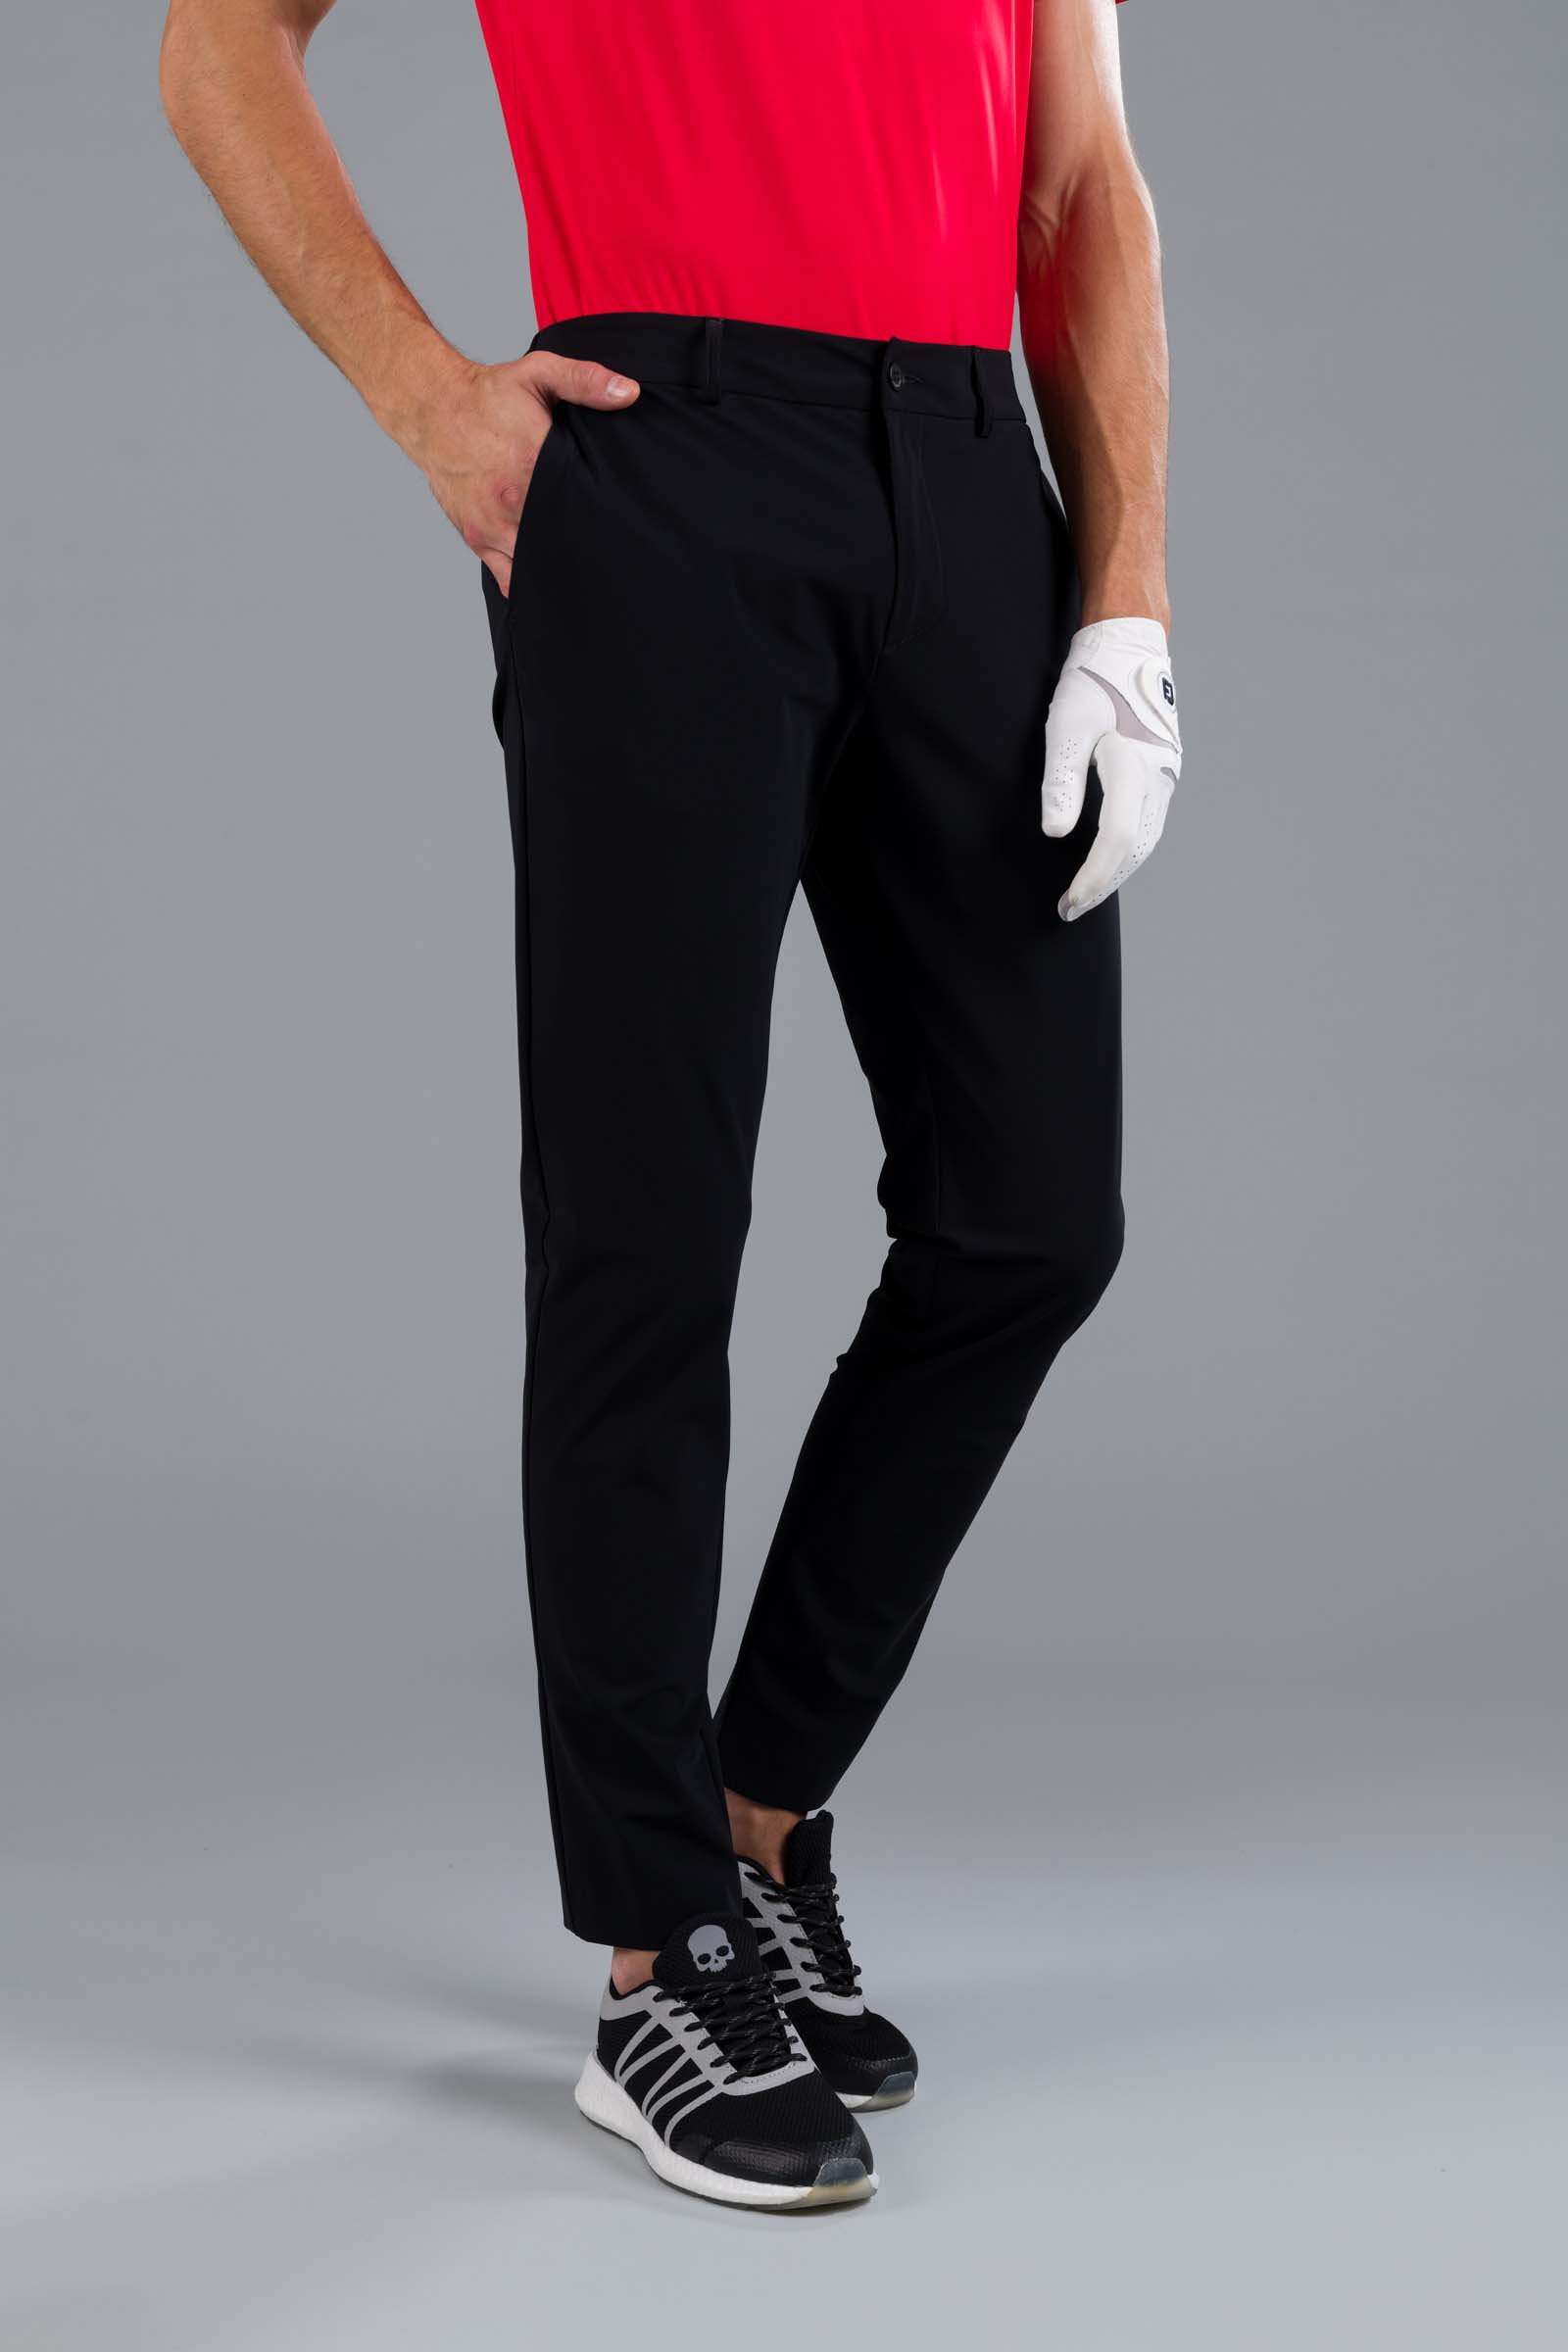 Wholesale High Quality Breathable Performance Golf Pant